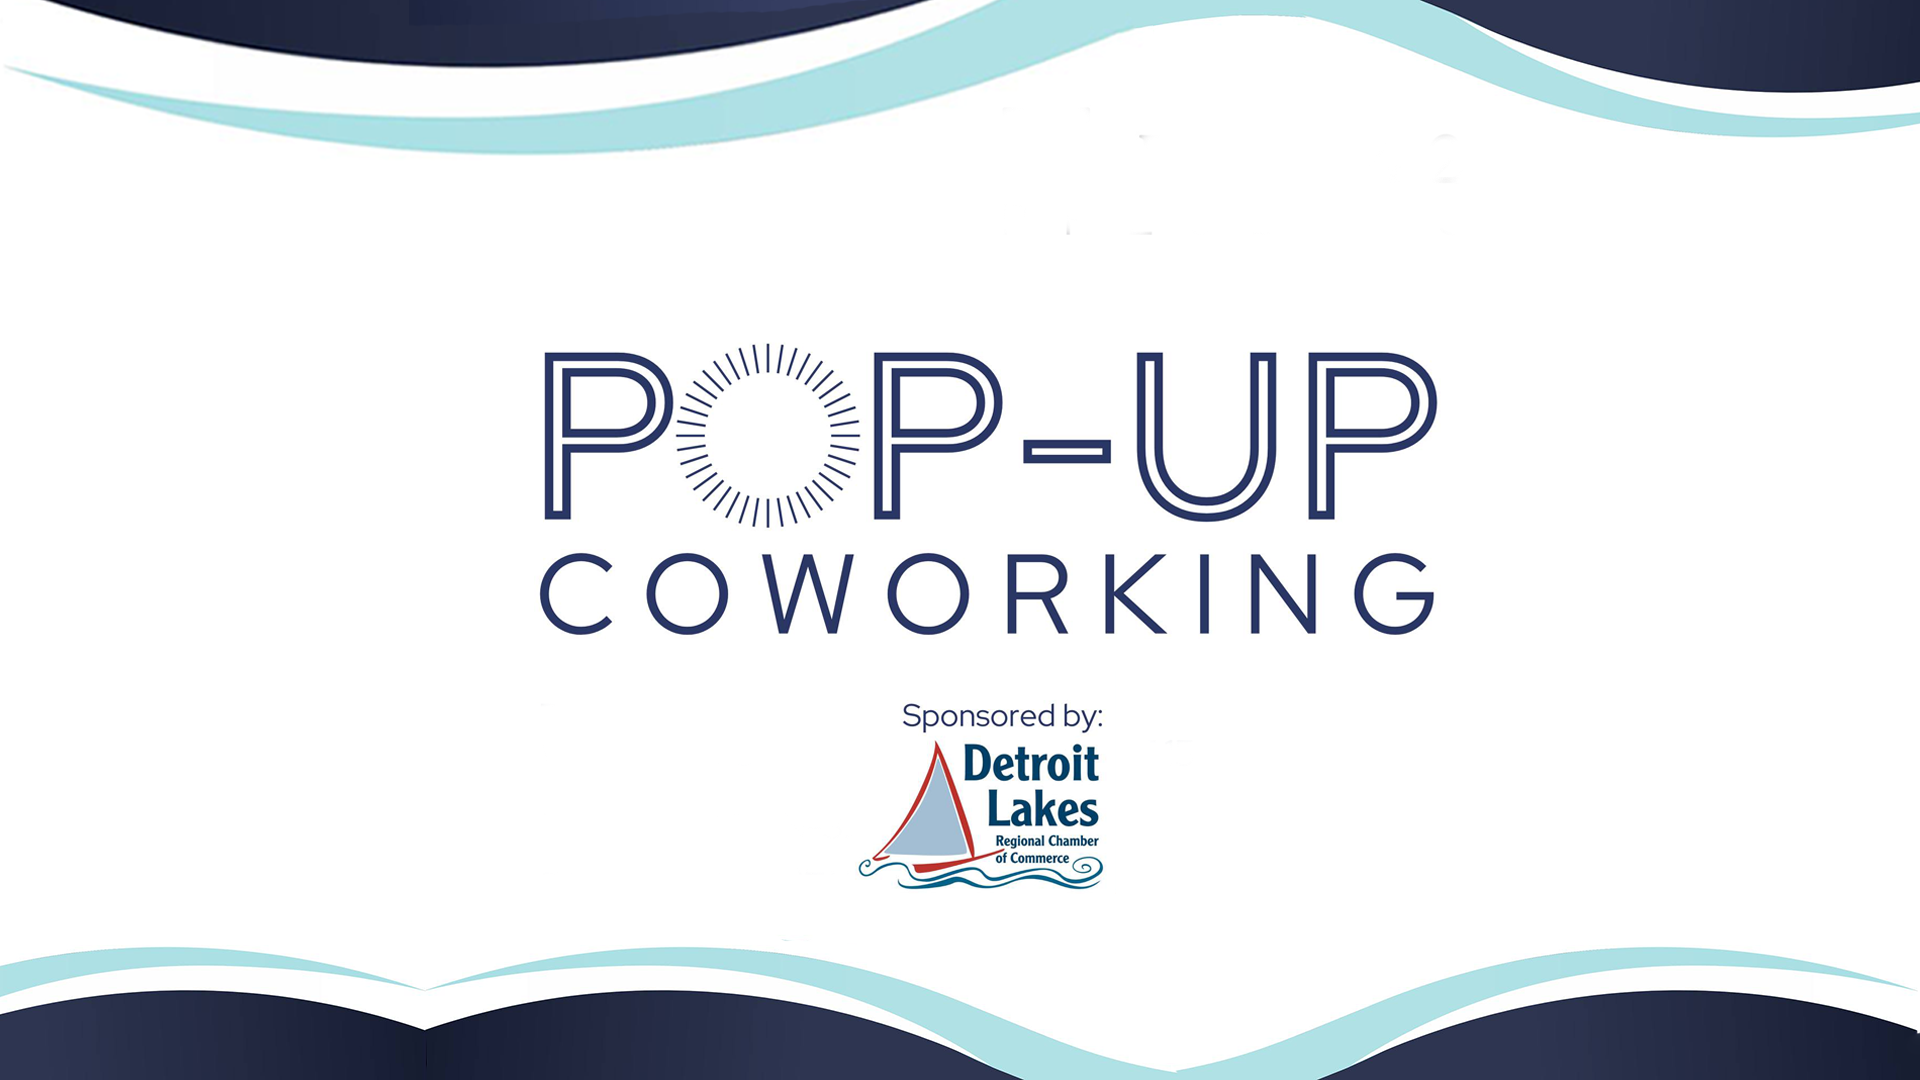 Pop-up Coworking sponsored by the Detroit Lakes Chamber of Commerce